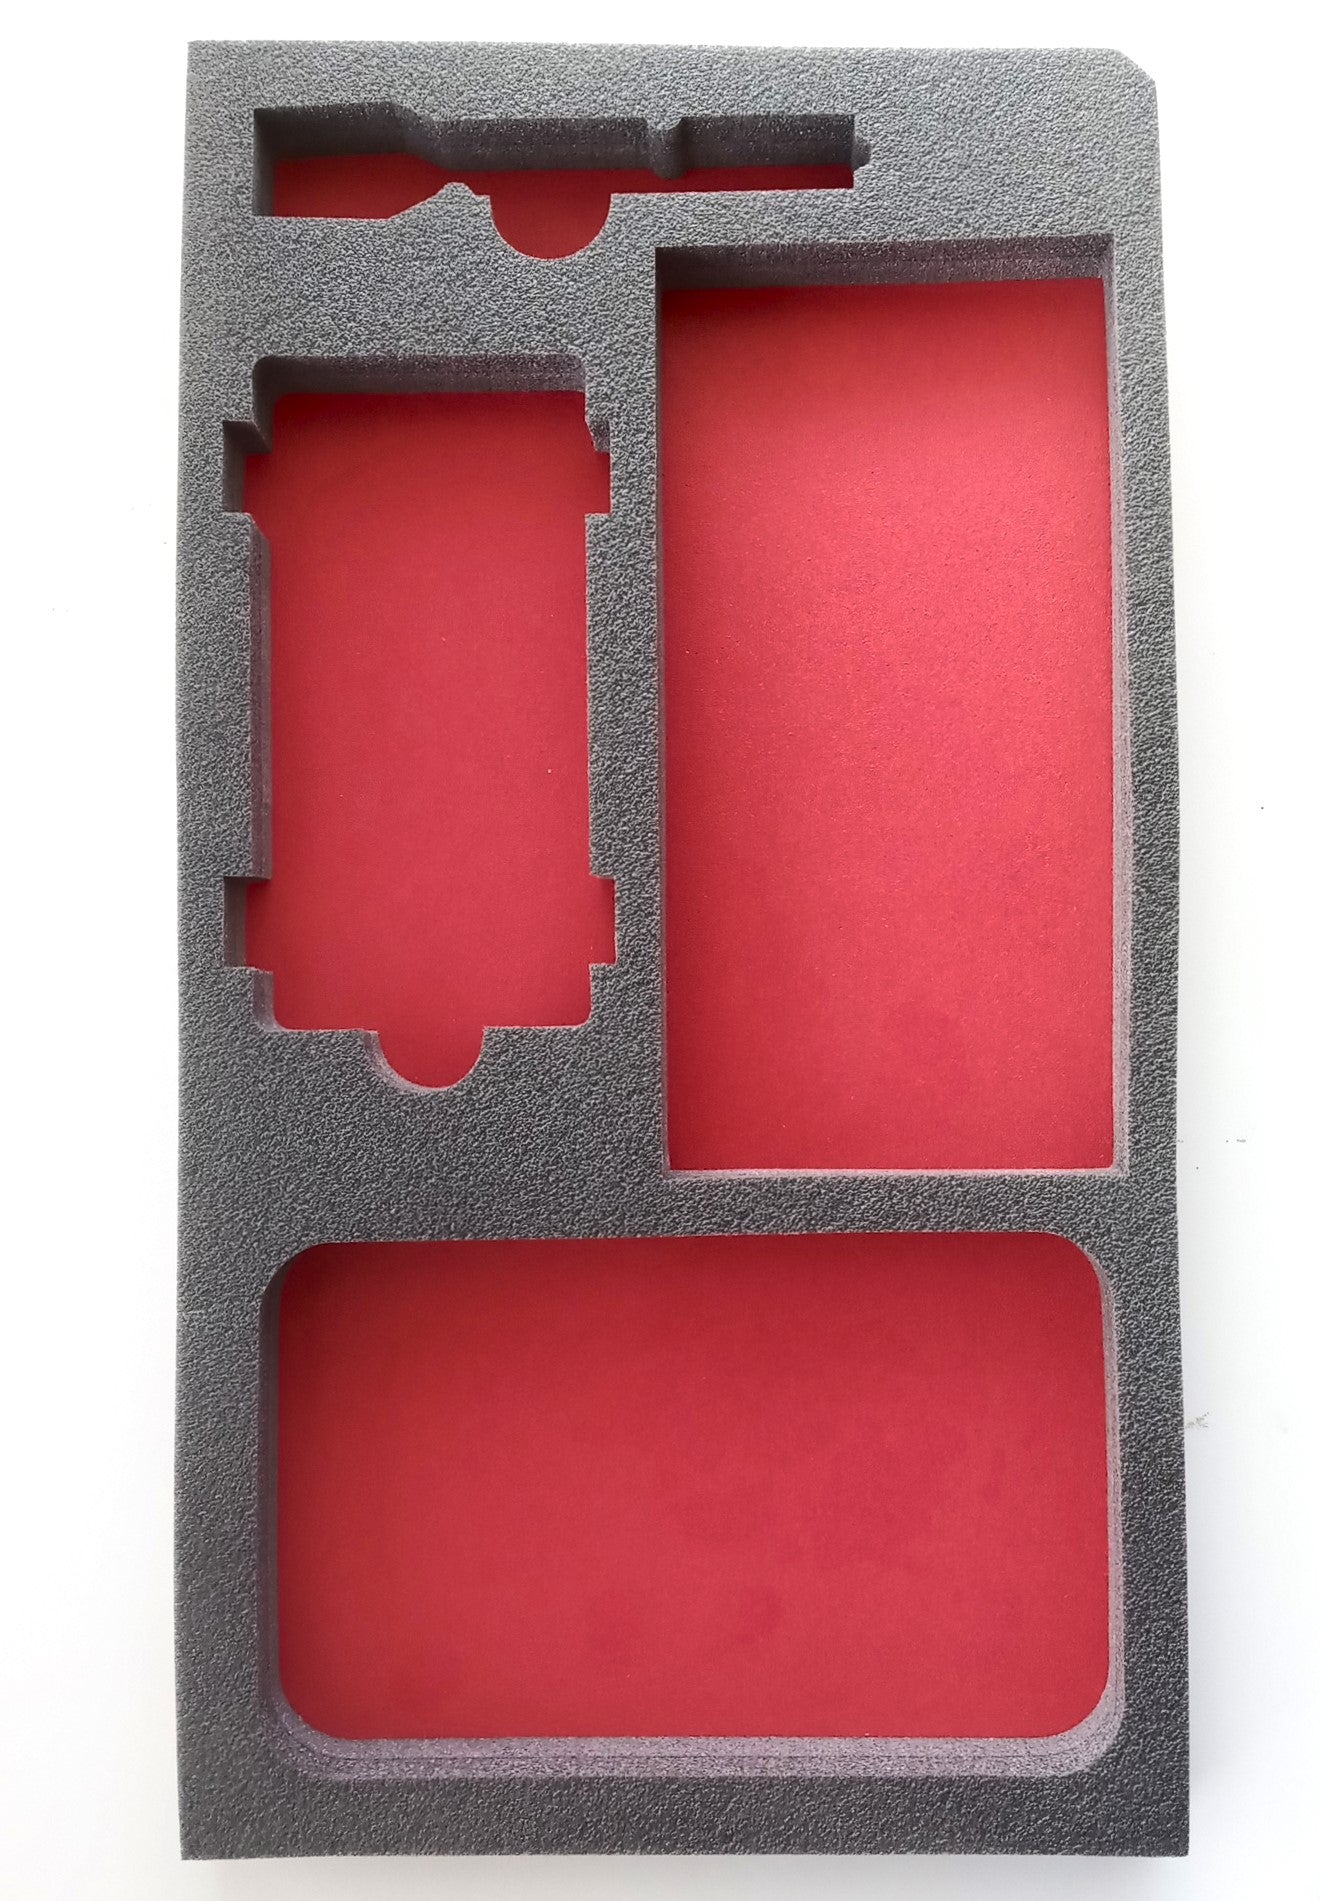 Armstrong 3R1F Foam Insert For Tools